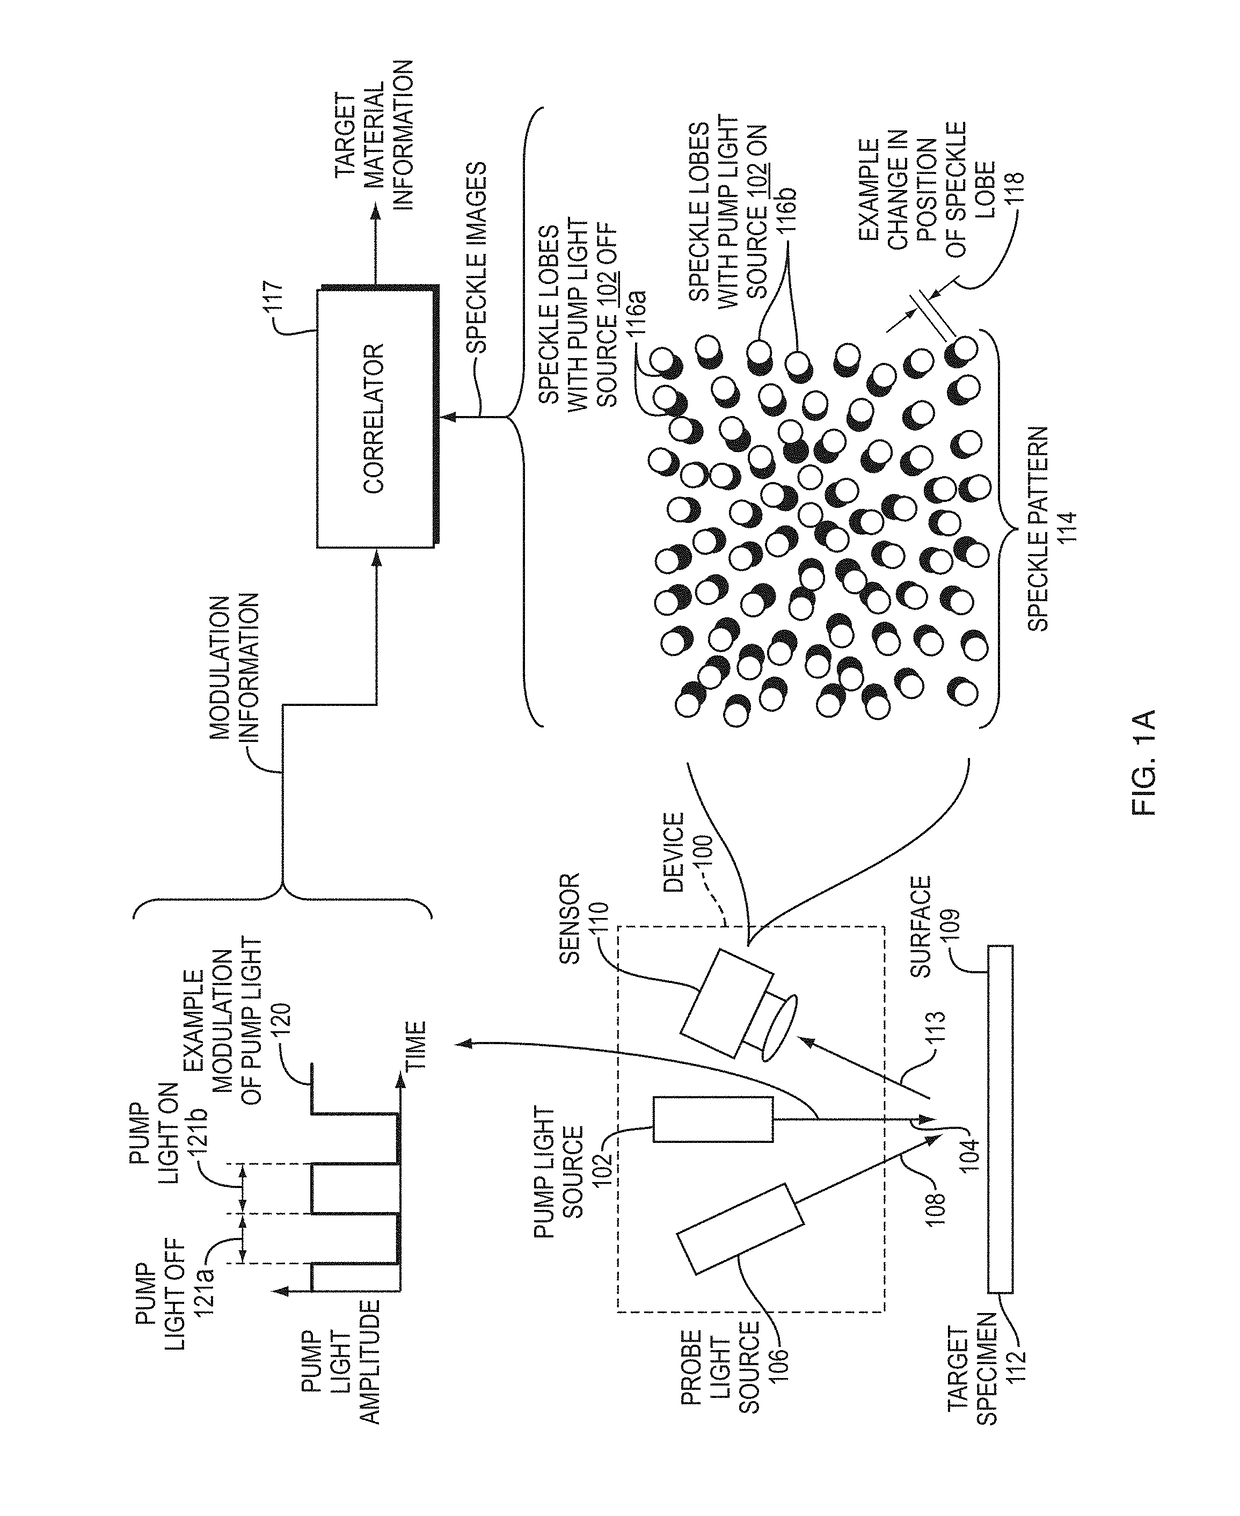 Devices and methods for sensing targets using photothermal speckle detection